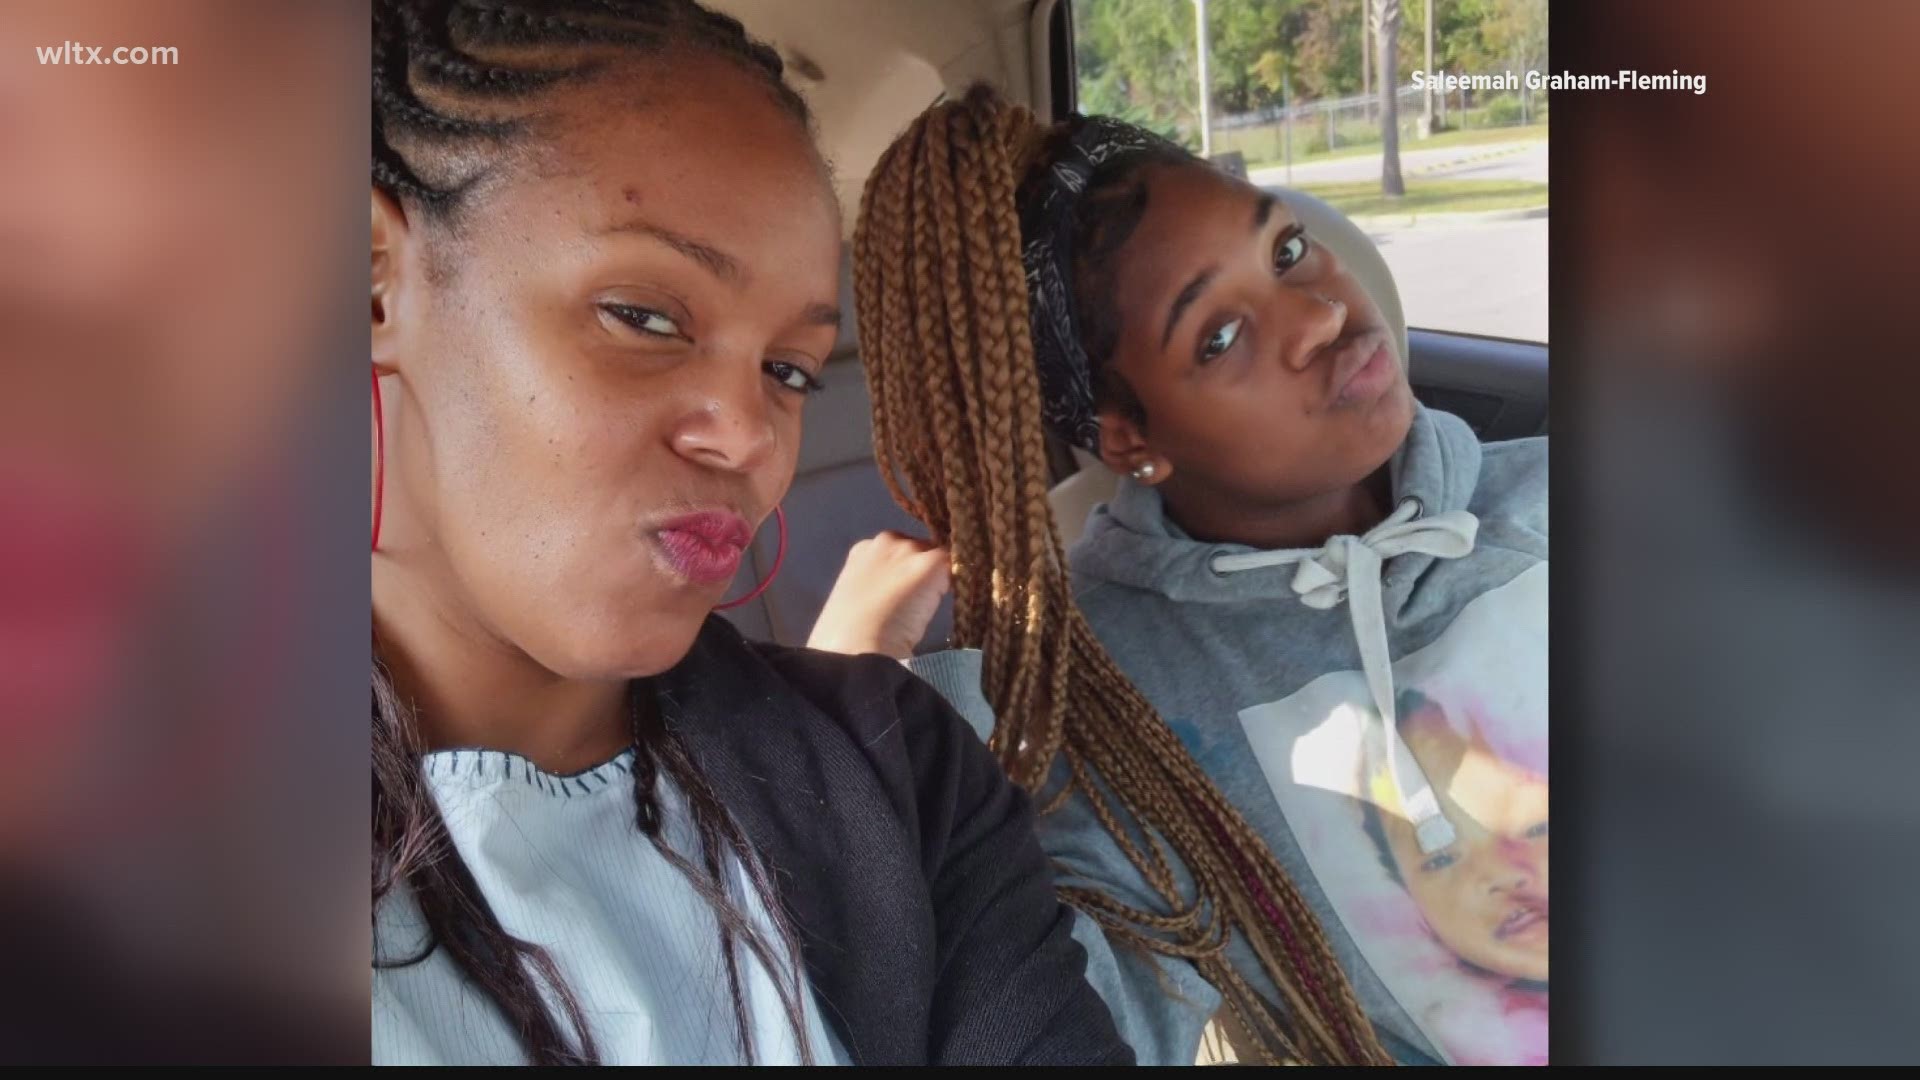 A man wanted in connection to the murder of Richland County 15-year-old Sanaa Amenhotep has been arrested, according to the Lexington County Sheriff's Department.